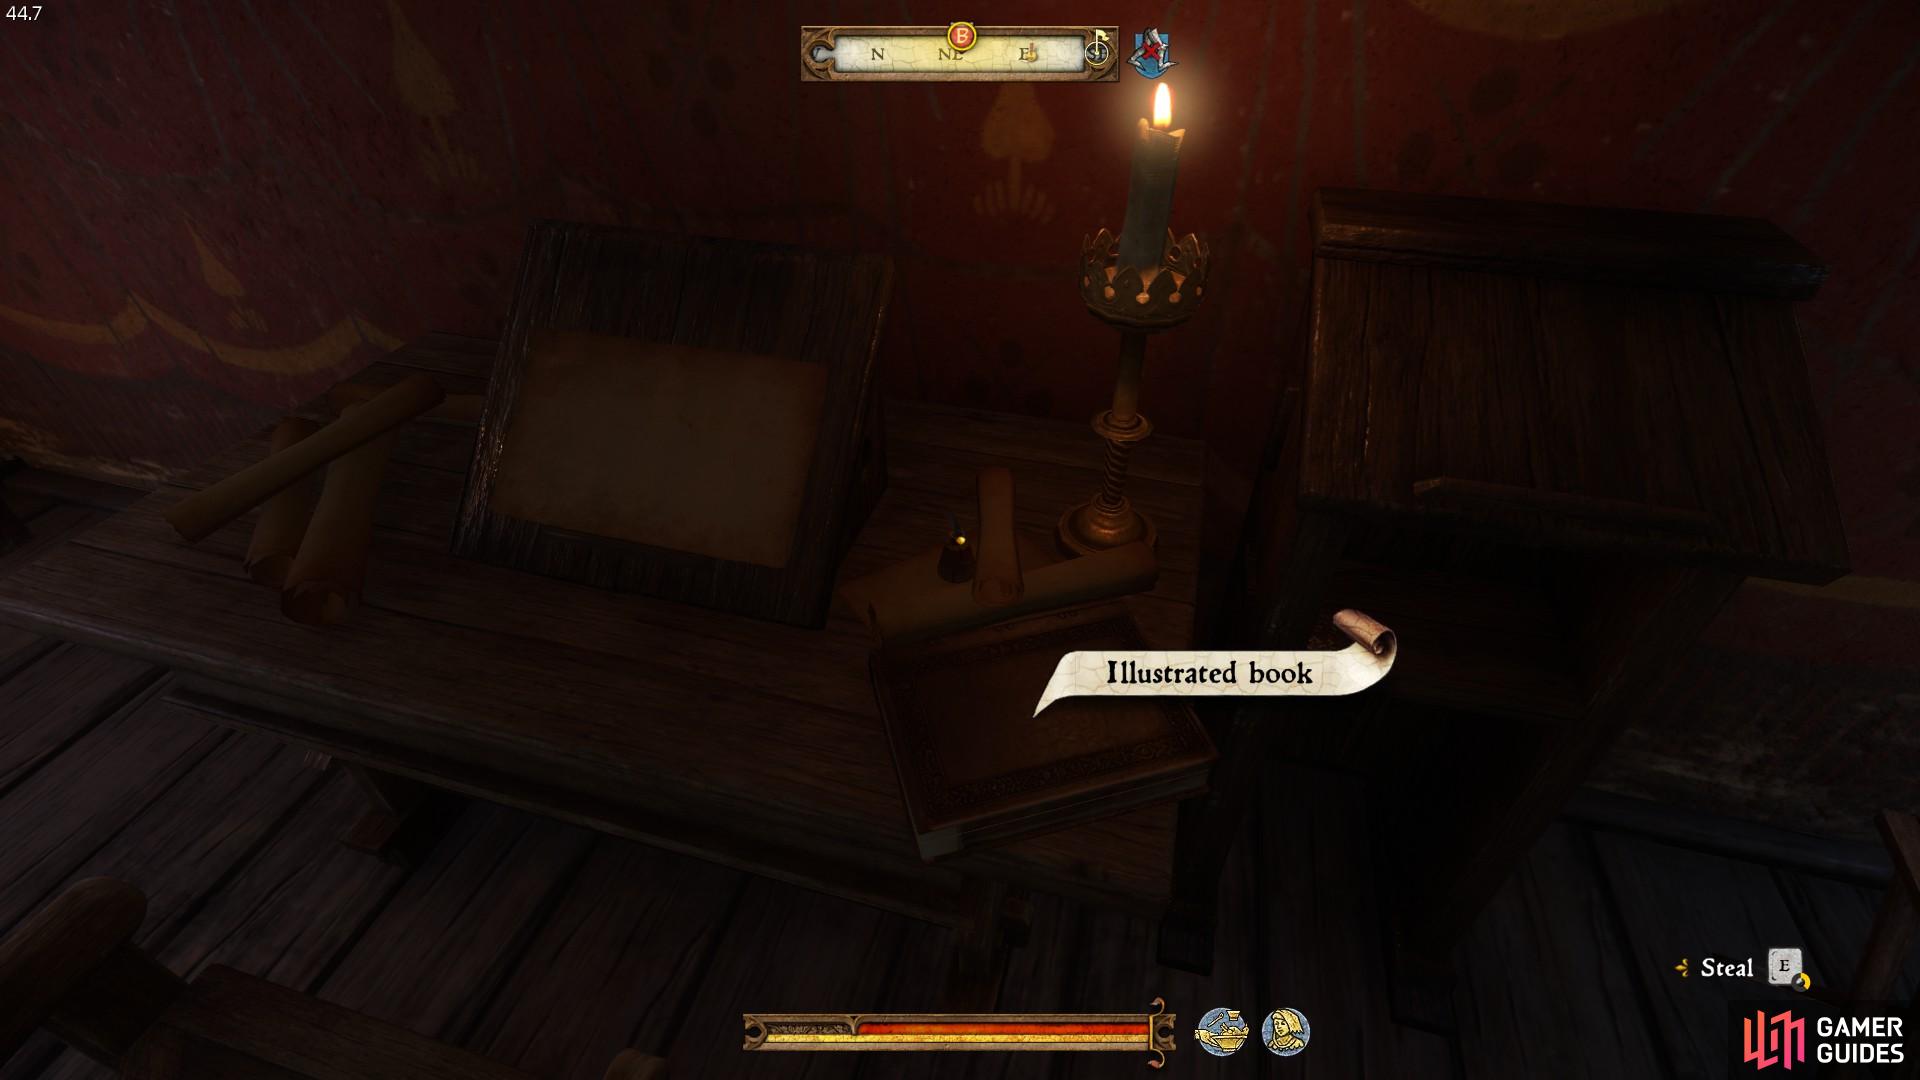 The book is located on the table directly in front of the doorway. 